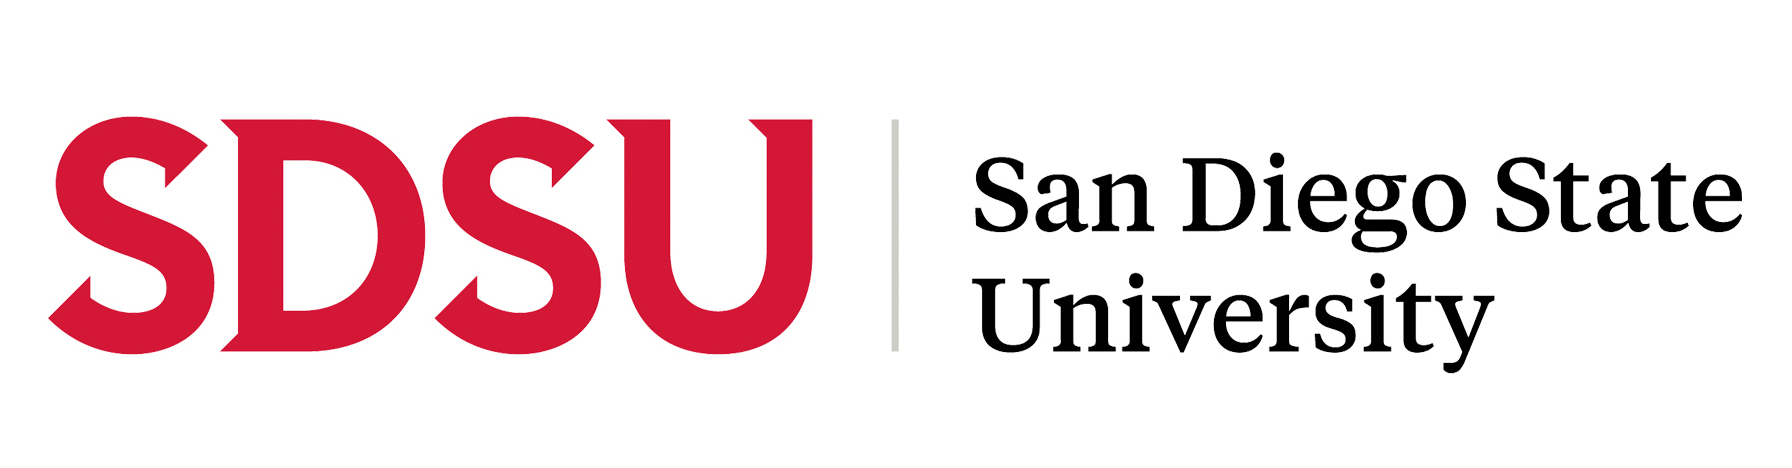 Implemented within San Diego State University's content management system.